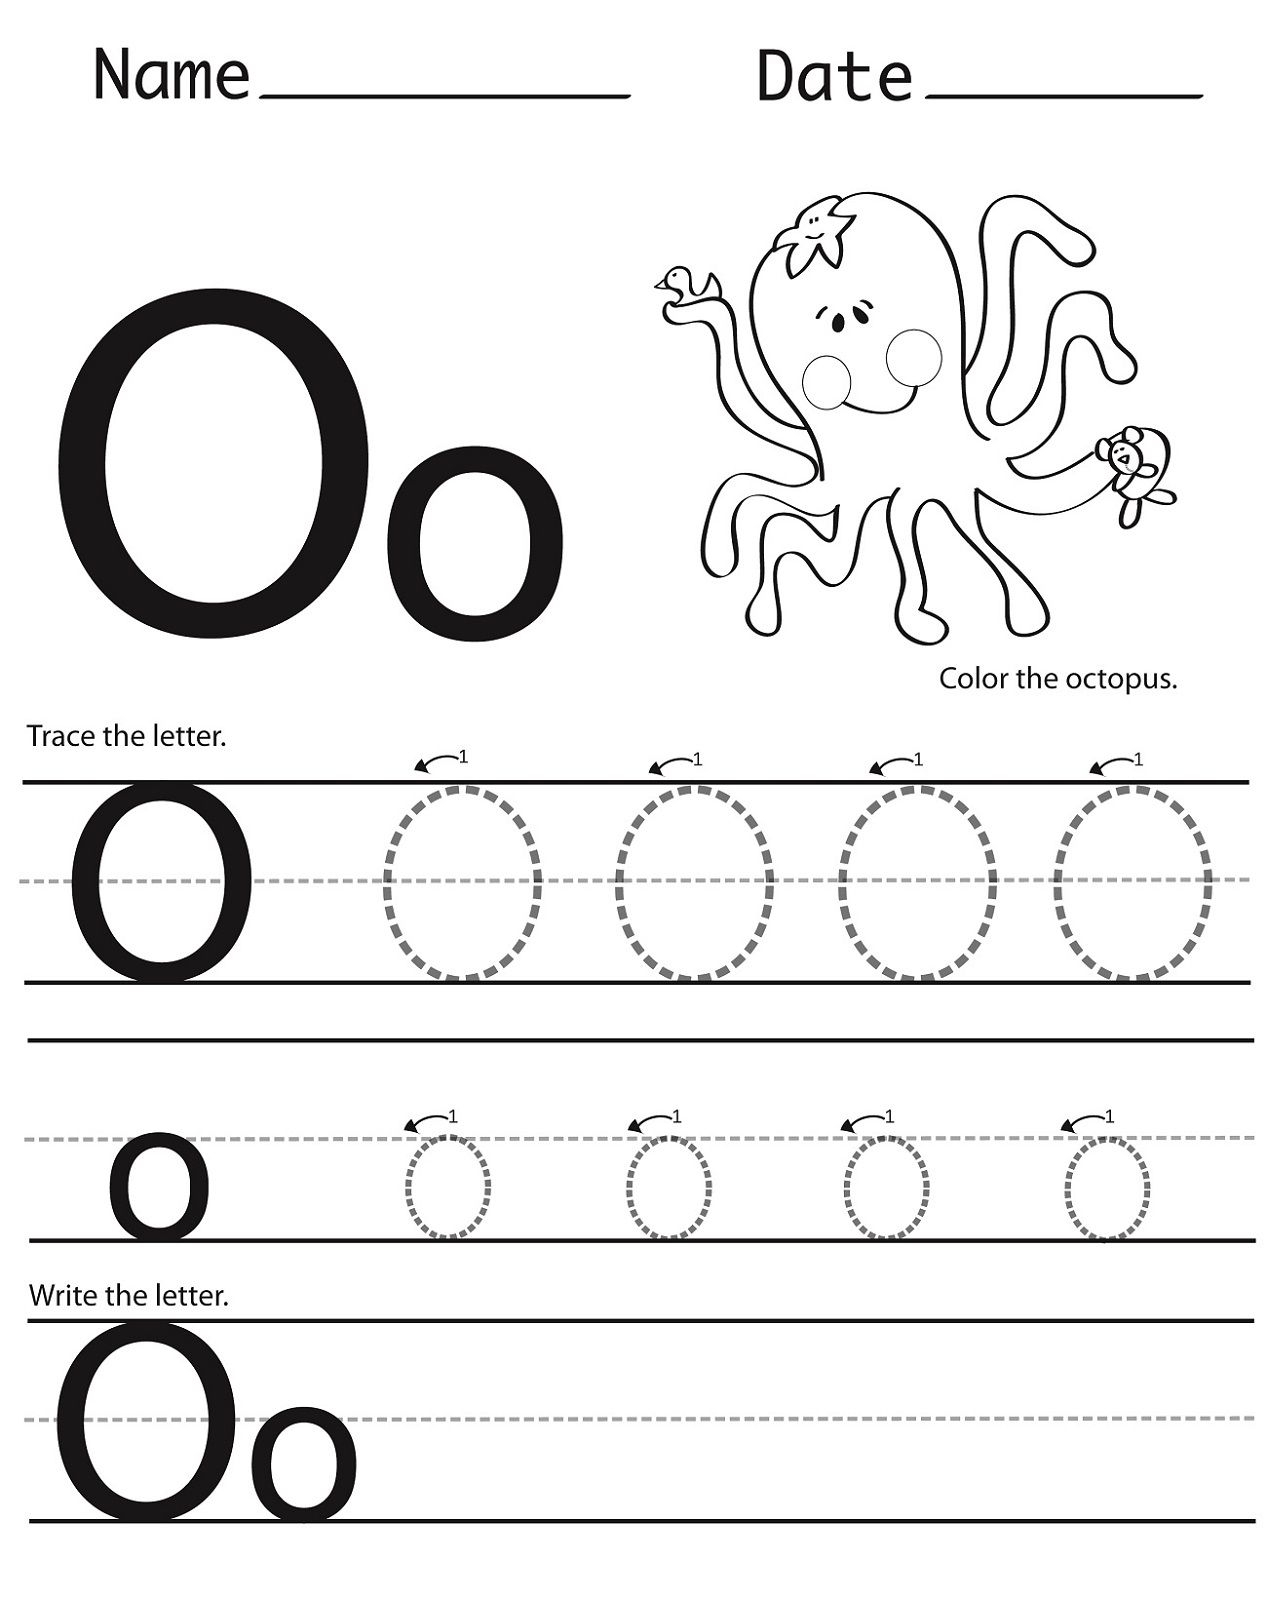 Letter O Worksheets - Kids Learning Activity | Letter O pertaining to Letter O Worksheets For Kindergarten Free